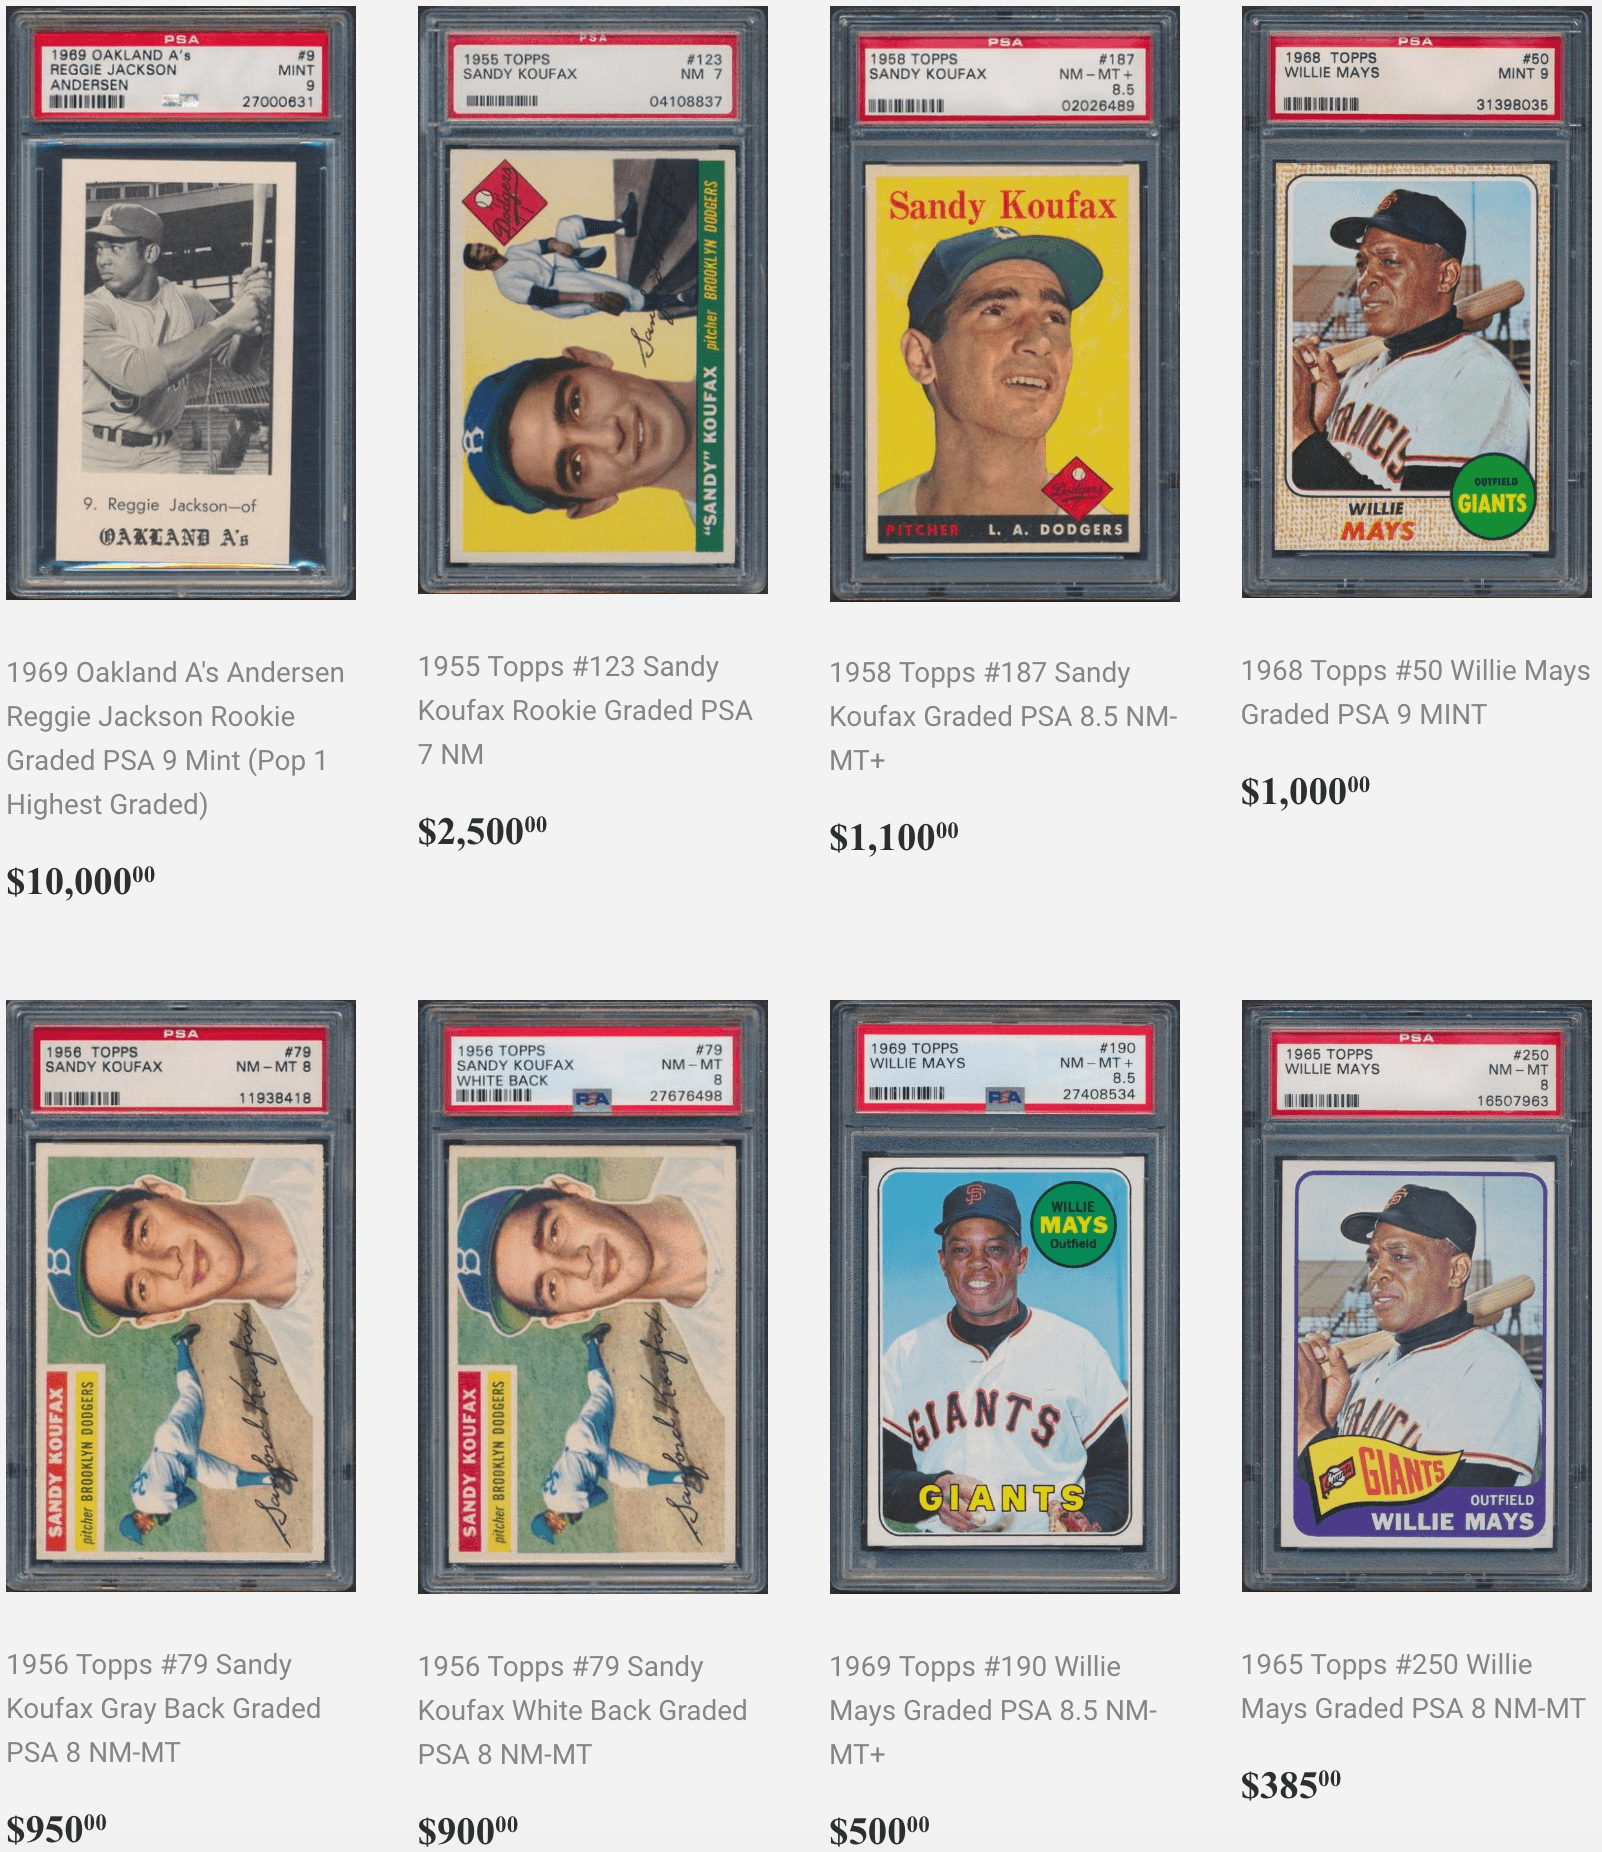 60 Most Valuable Baseball Cards The All Time Dream List Old Sports Cards